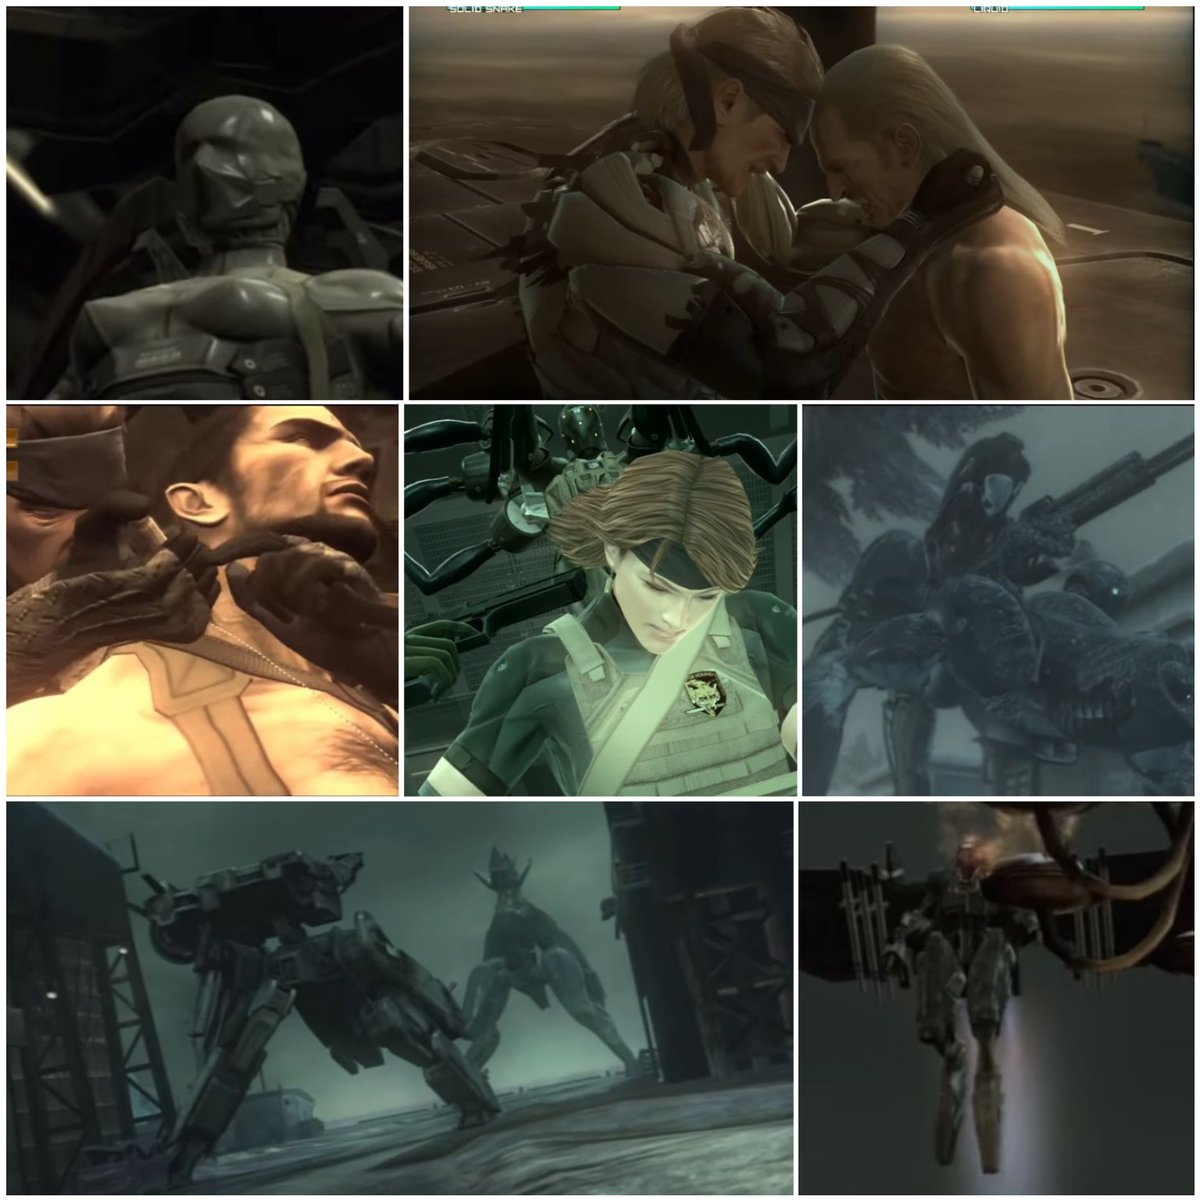 All boss fights in Metal Gear Solid 4 reviewed and ranked.[A thread]